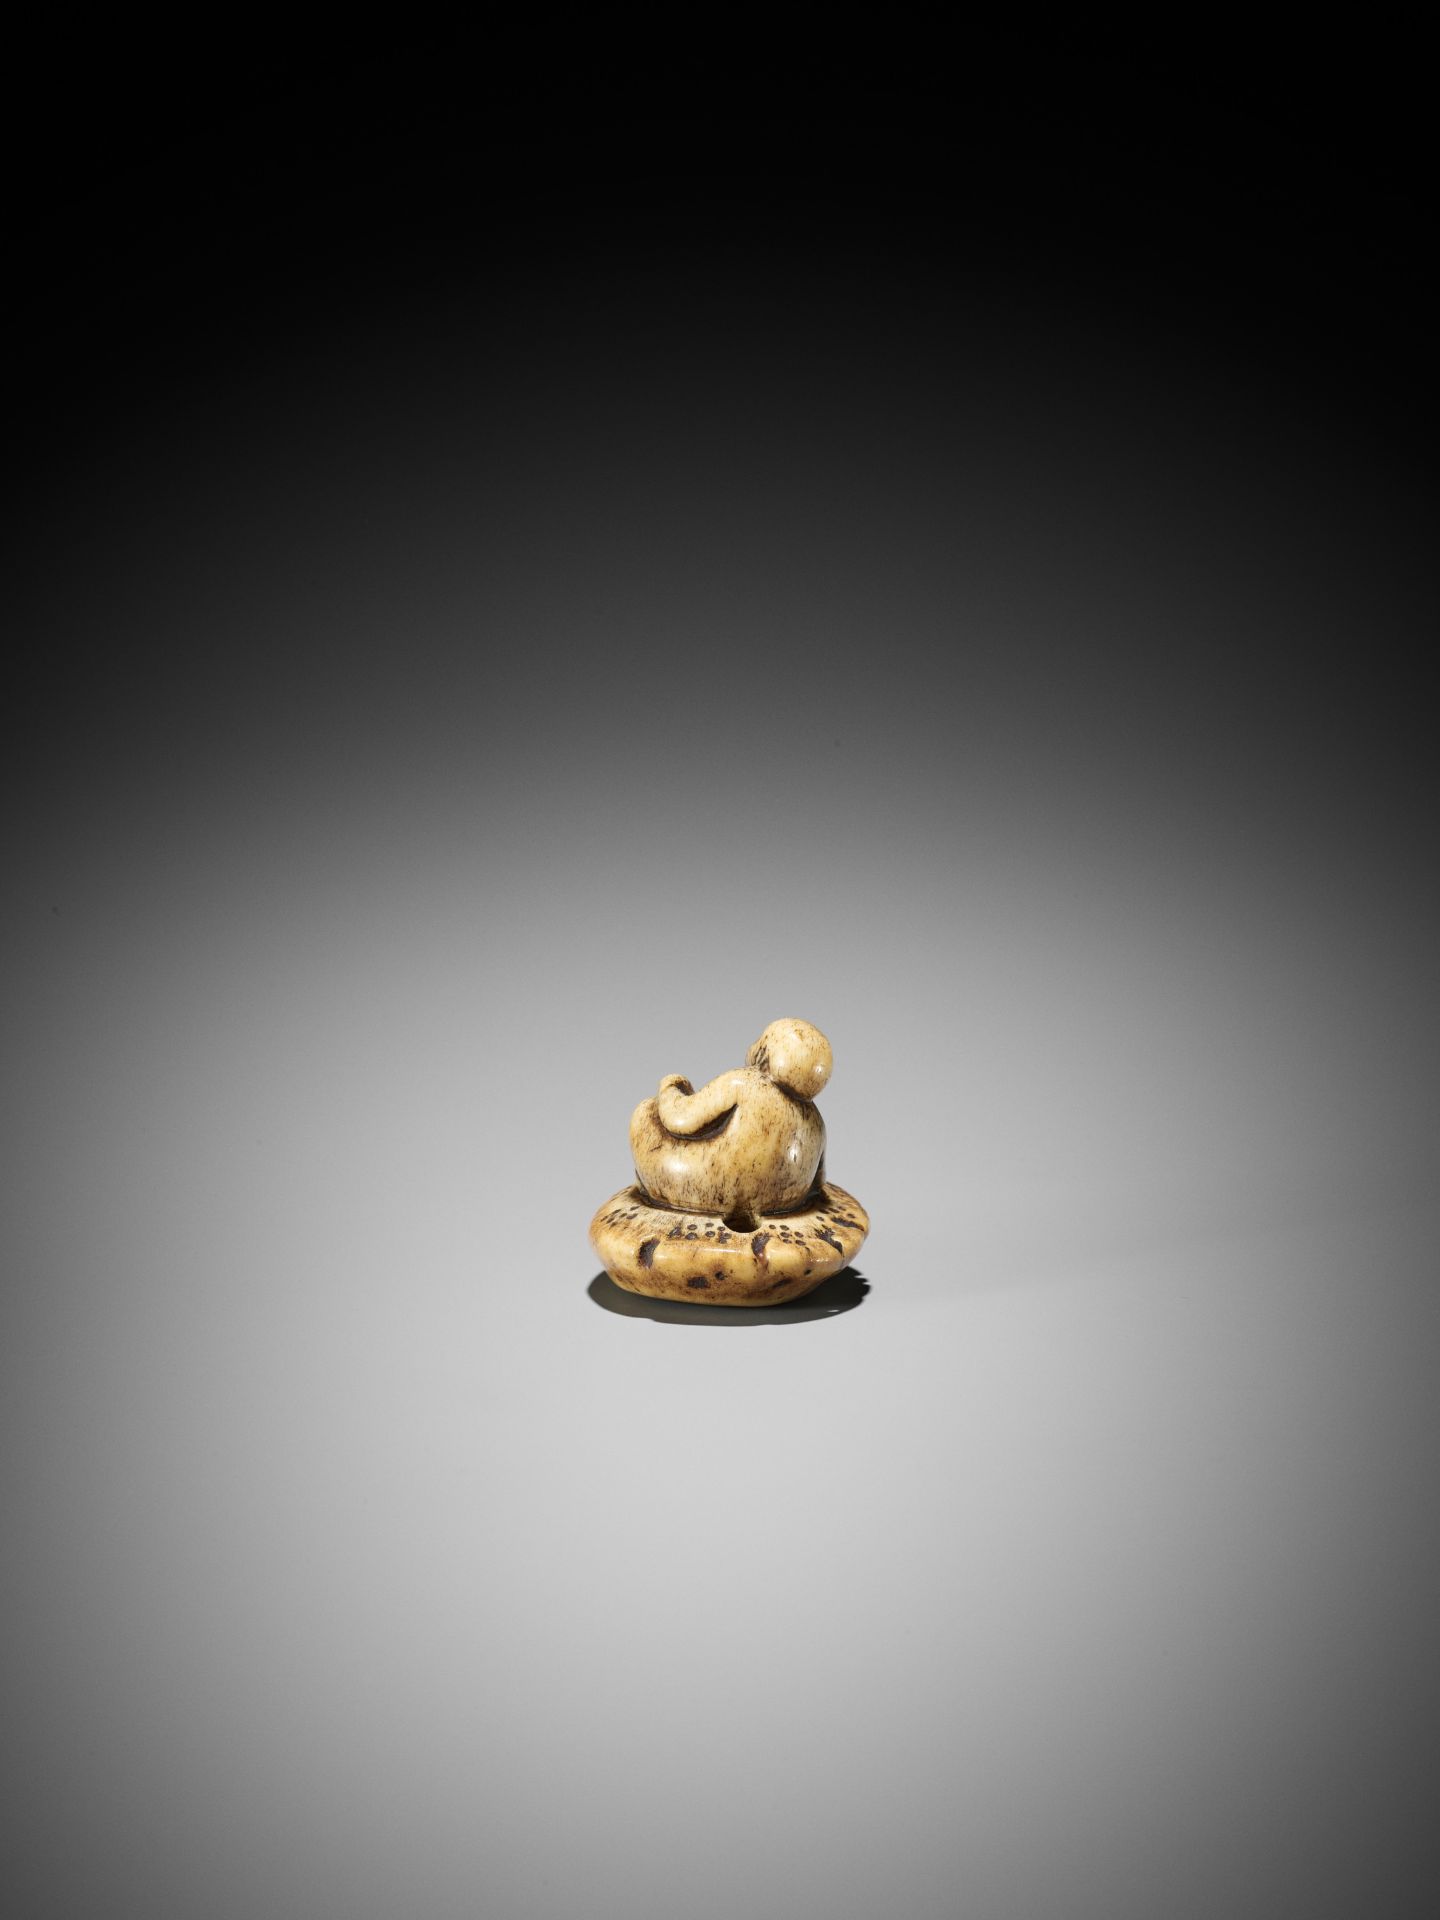 A STAG ANTLER NETSUKE OF A MONKEY HOLDING A PEACH - Image 5 of 8